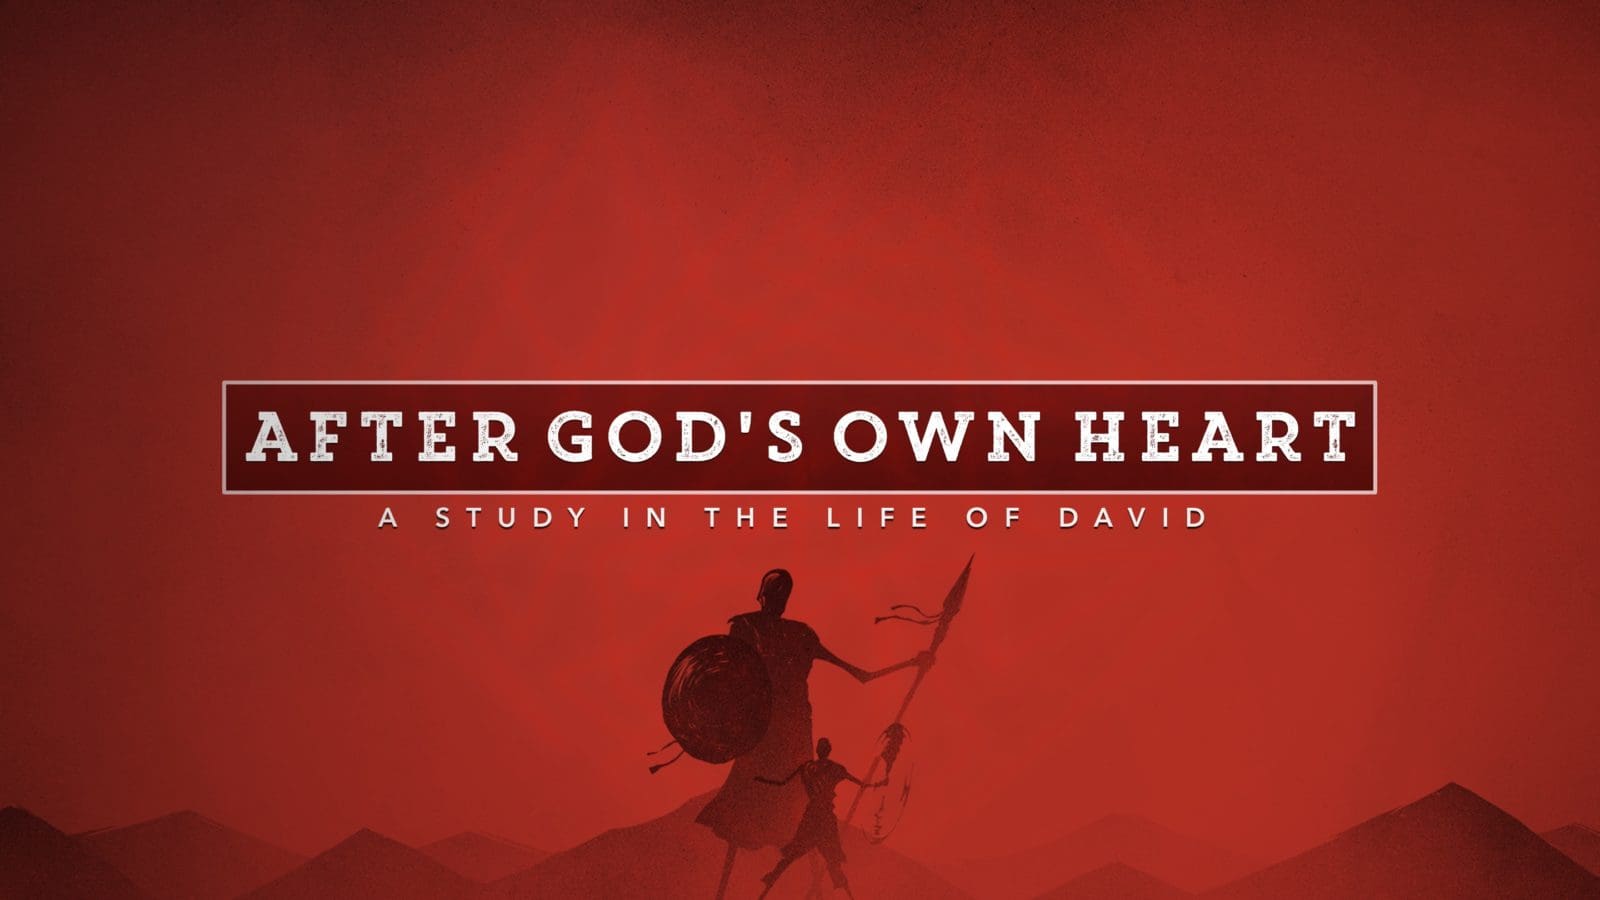 After God’s Own Heart [A Study in the Life of David]